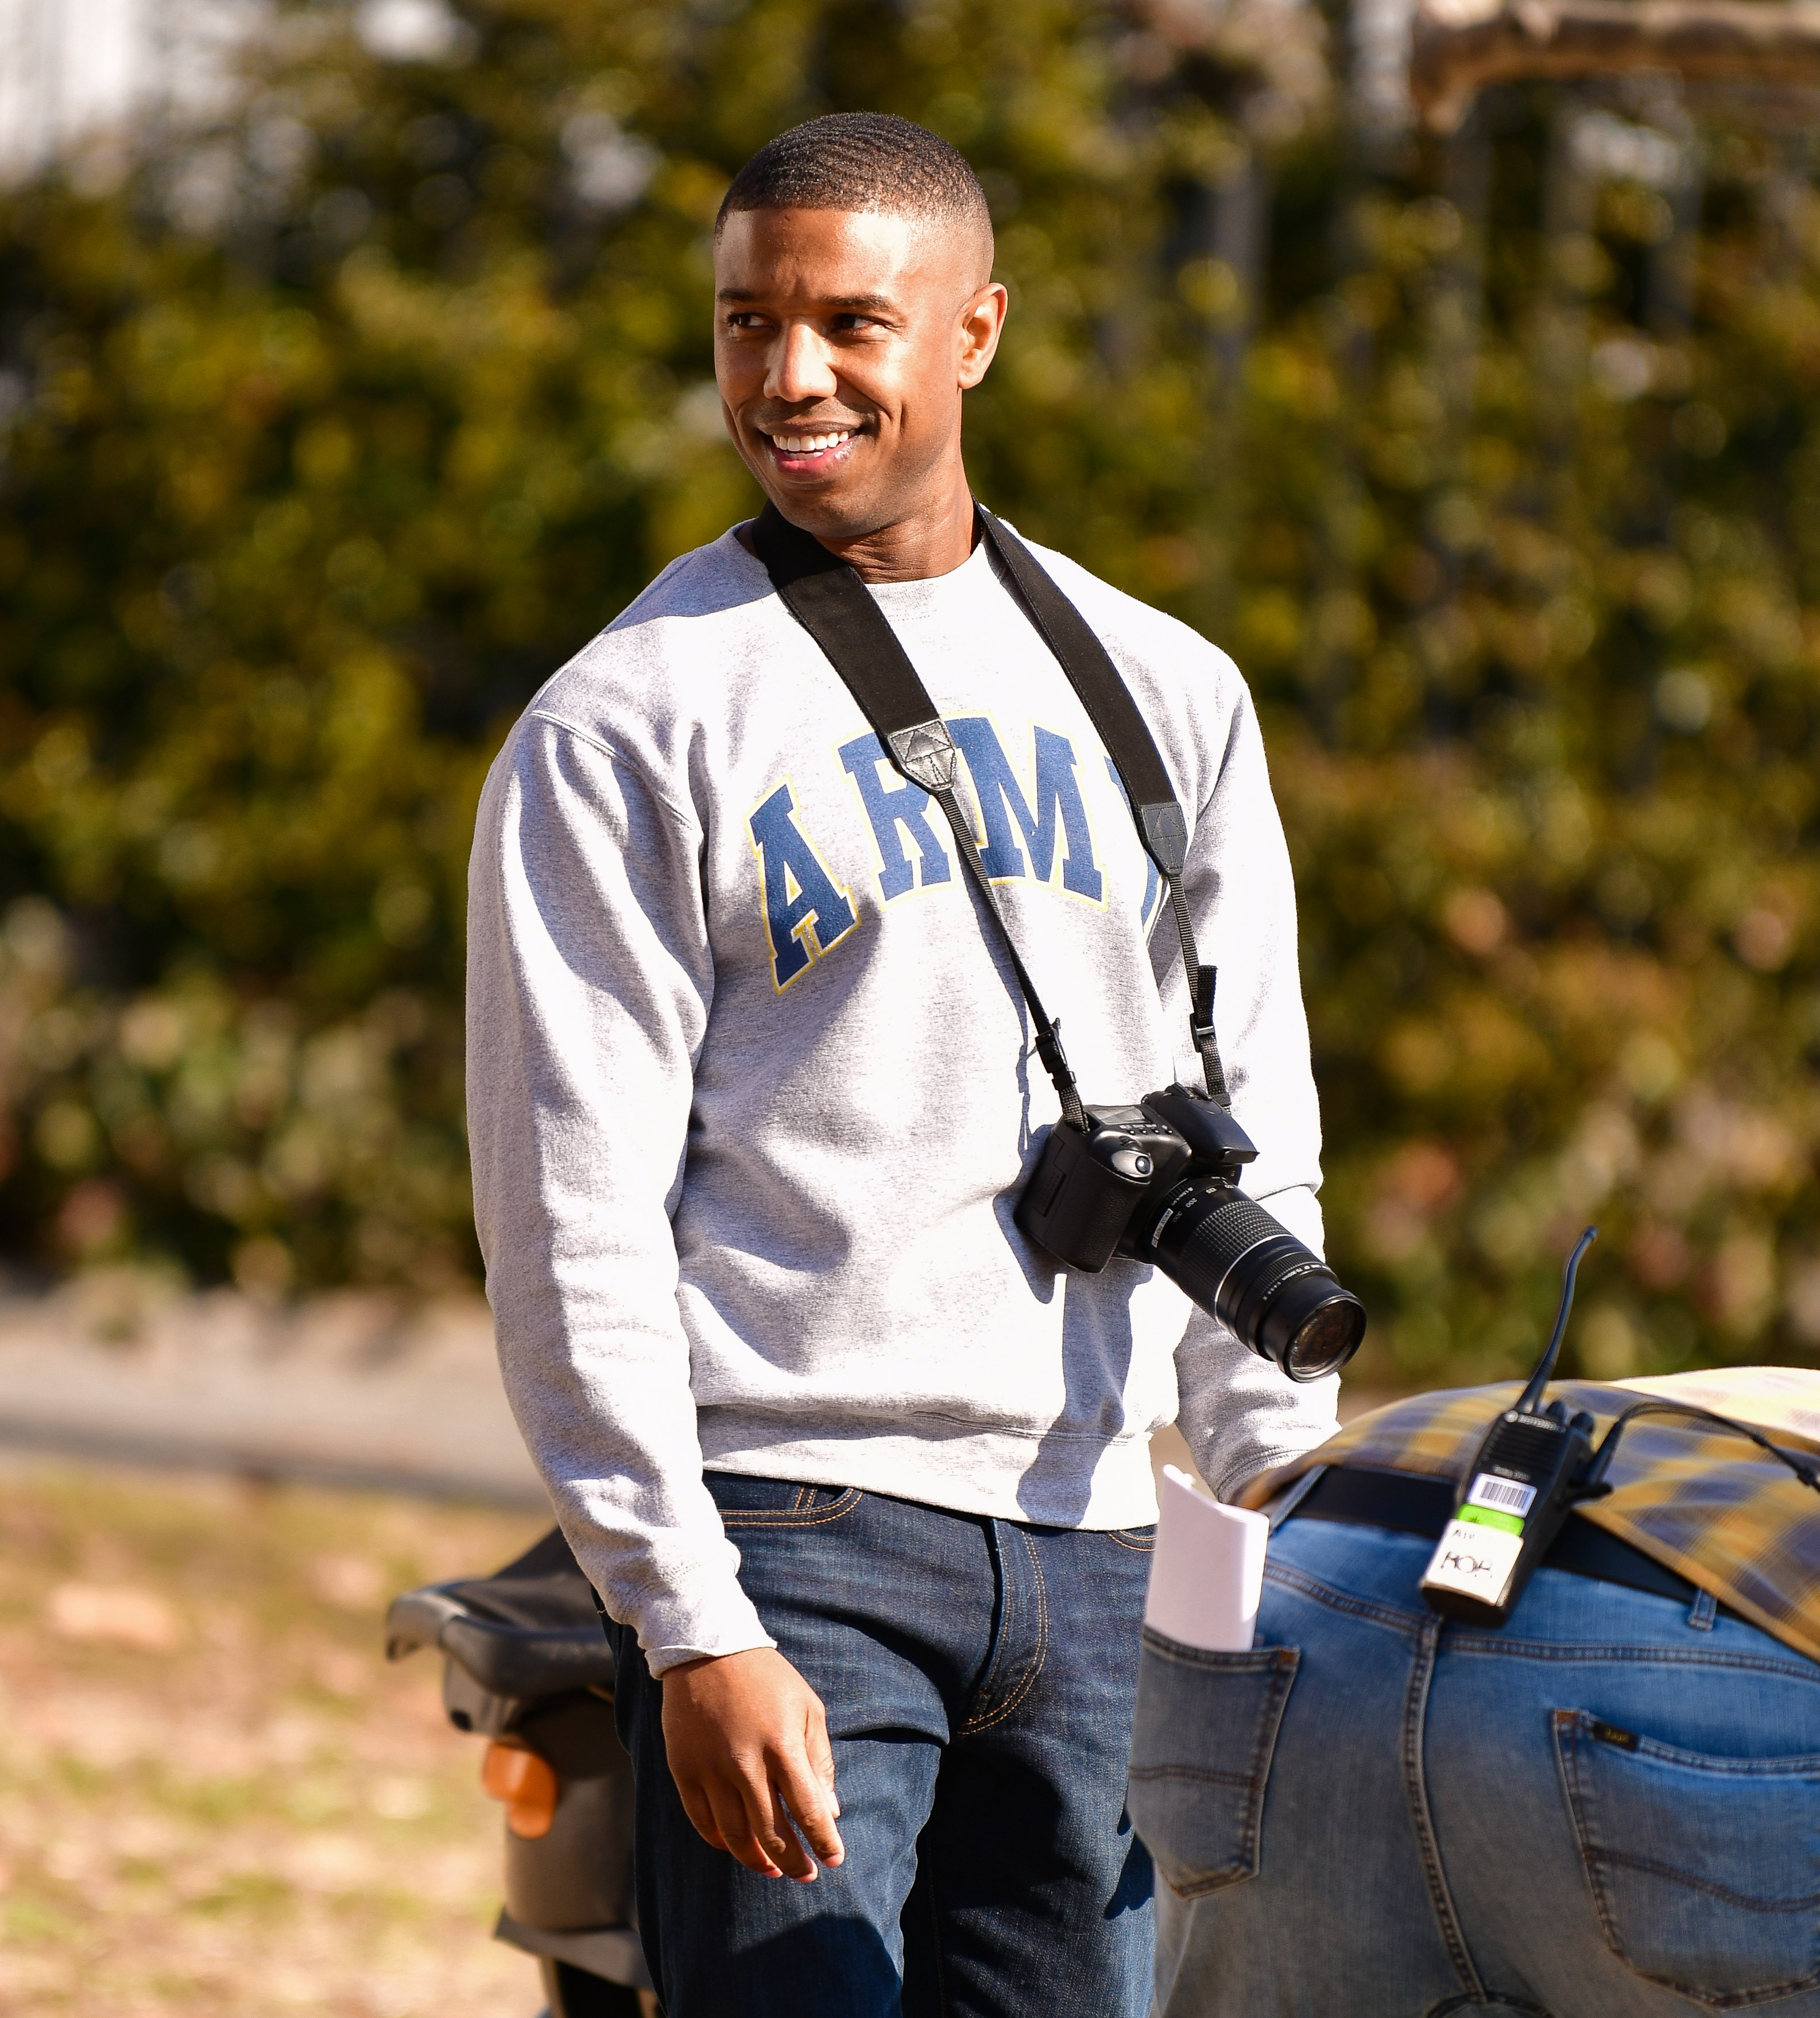  Michael B. Jordan seen on the set of "Journal for Jordan" in Carl Schurz Park on March 9, 2021 in New York City. | Source: Getty Images